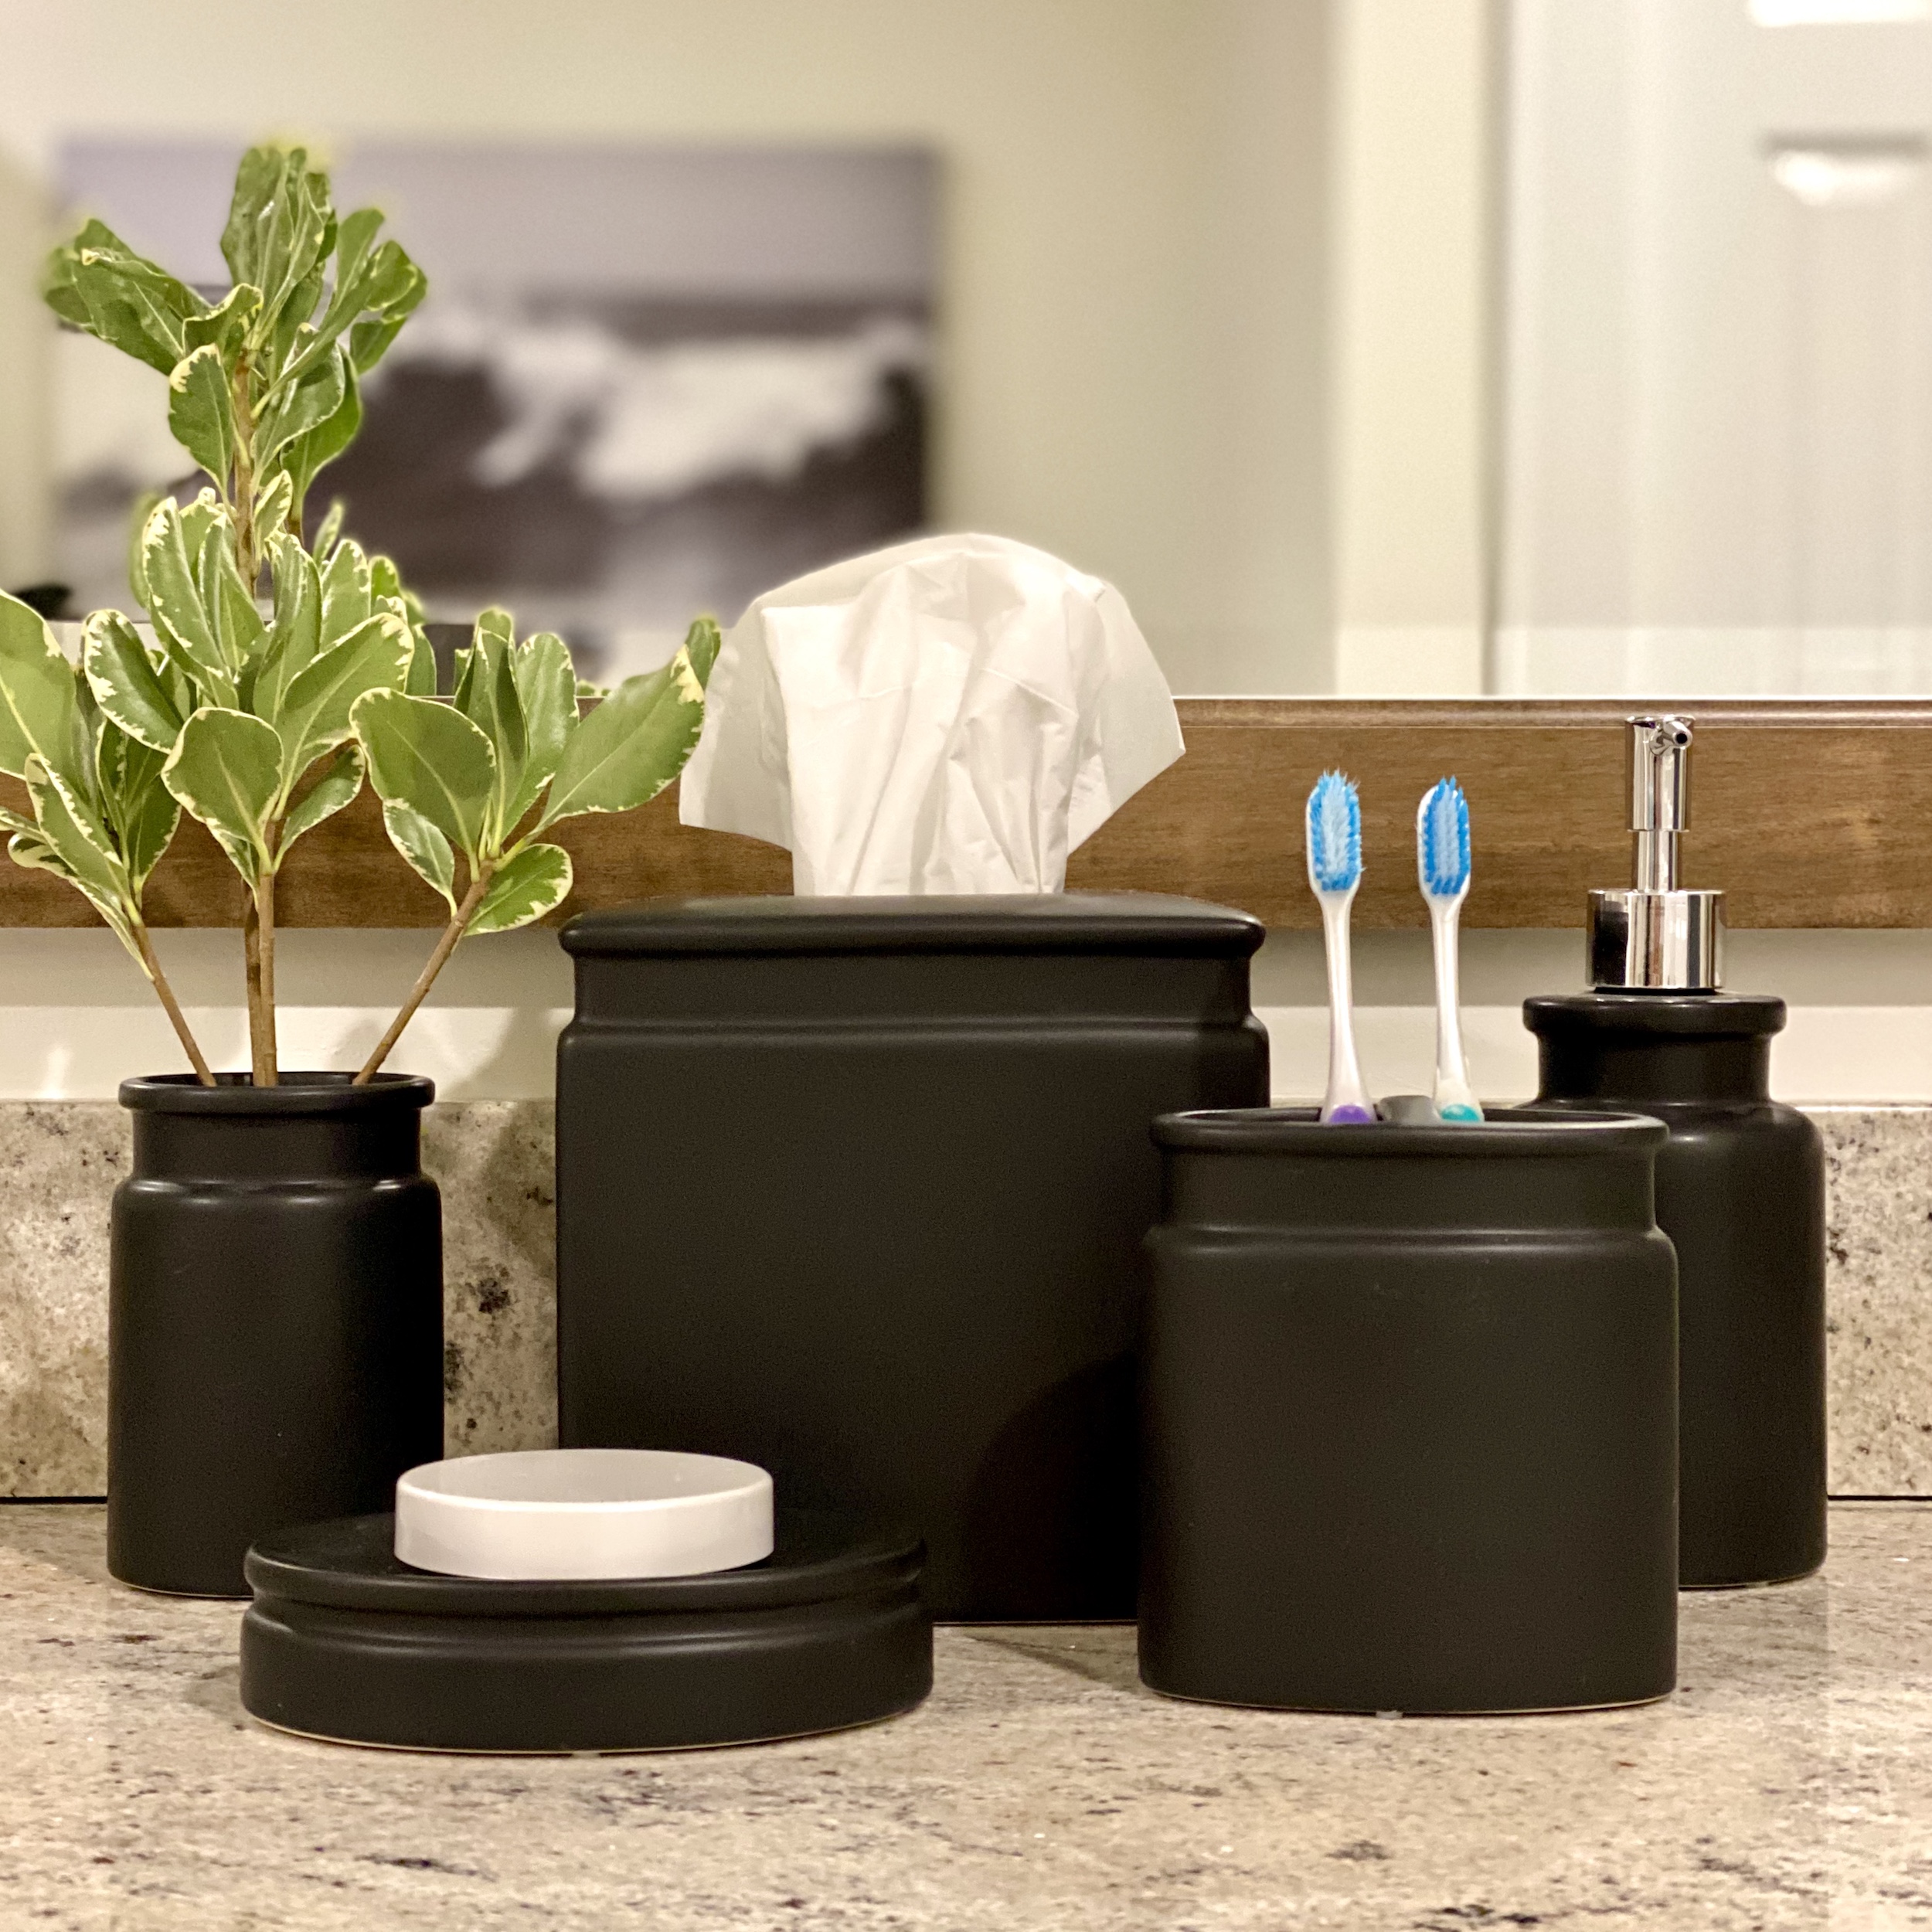 Matte black ceramic 5 piece bathroom vanity set including tissue box, toothbrush holder, lotion dispenser, soap dish, and cup.